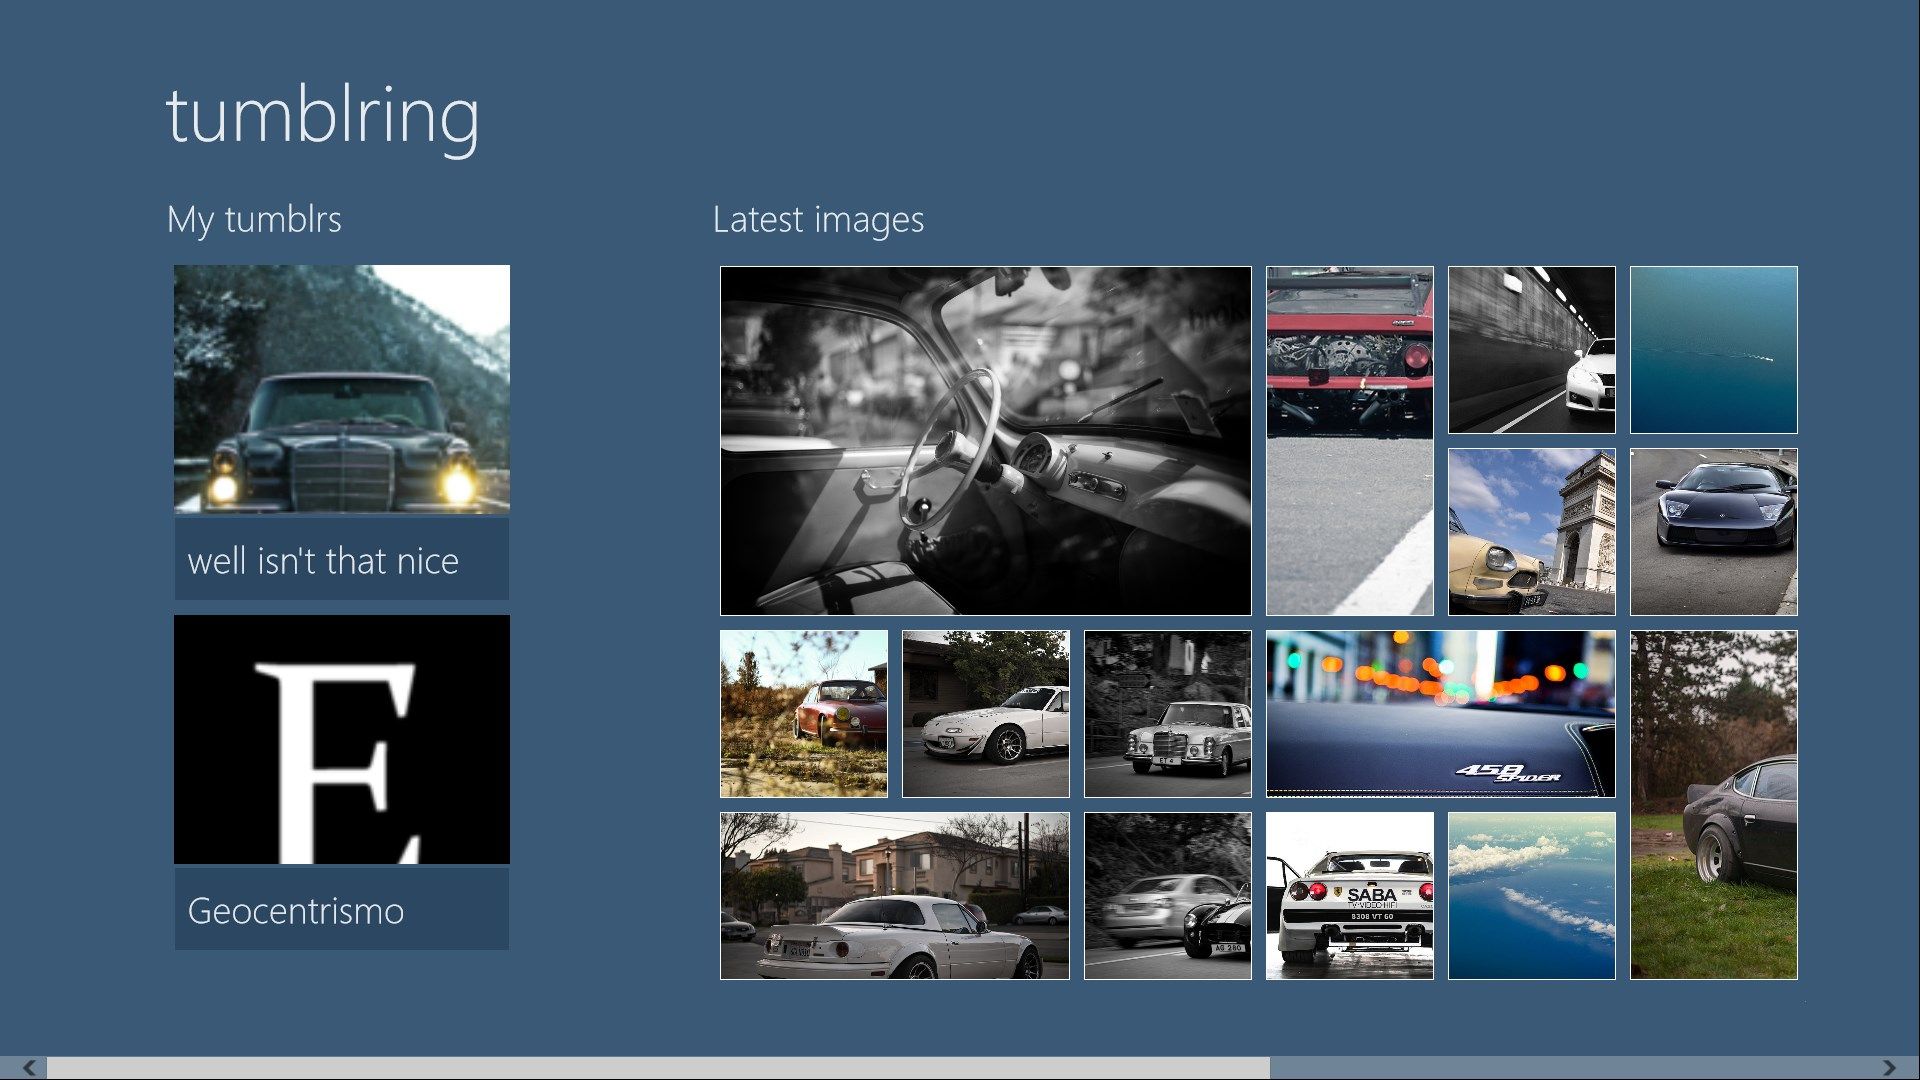 The main view of tumblring will display your favorite tumblrs and a collection of the latest images added to those.